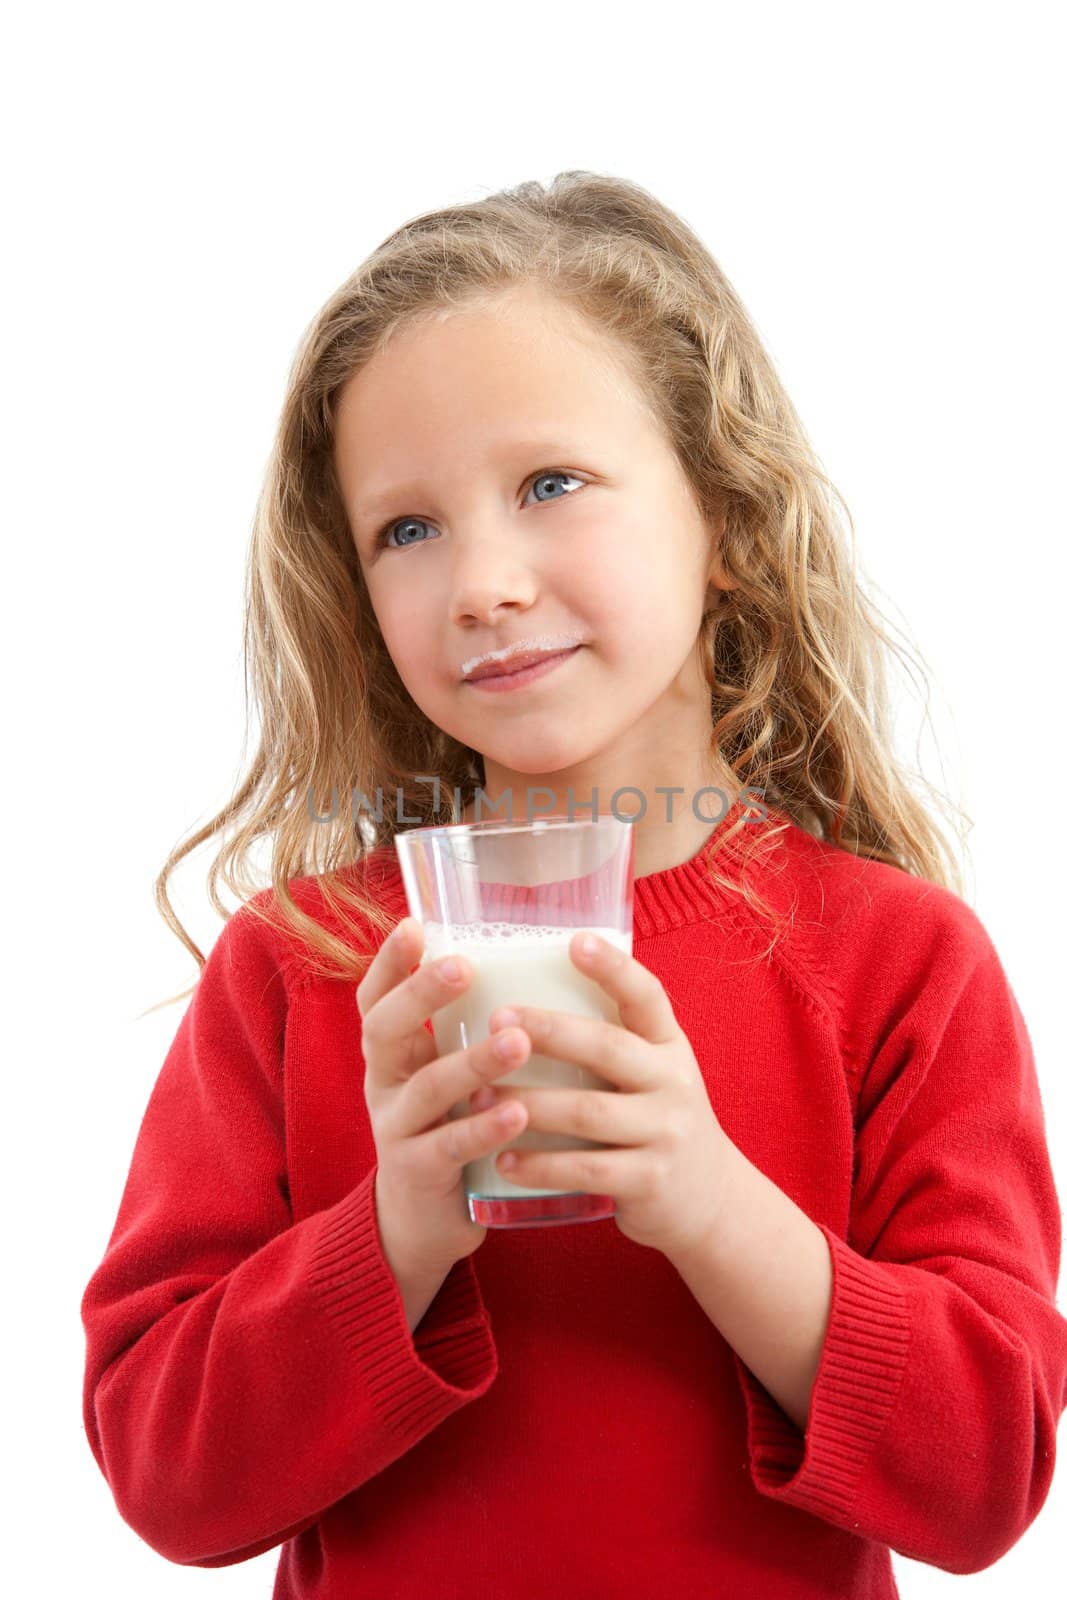 Cute girl holding glass of milk. by karelnoppe